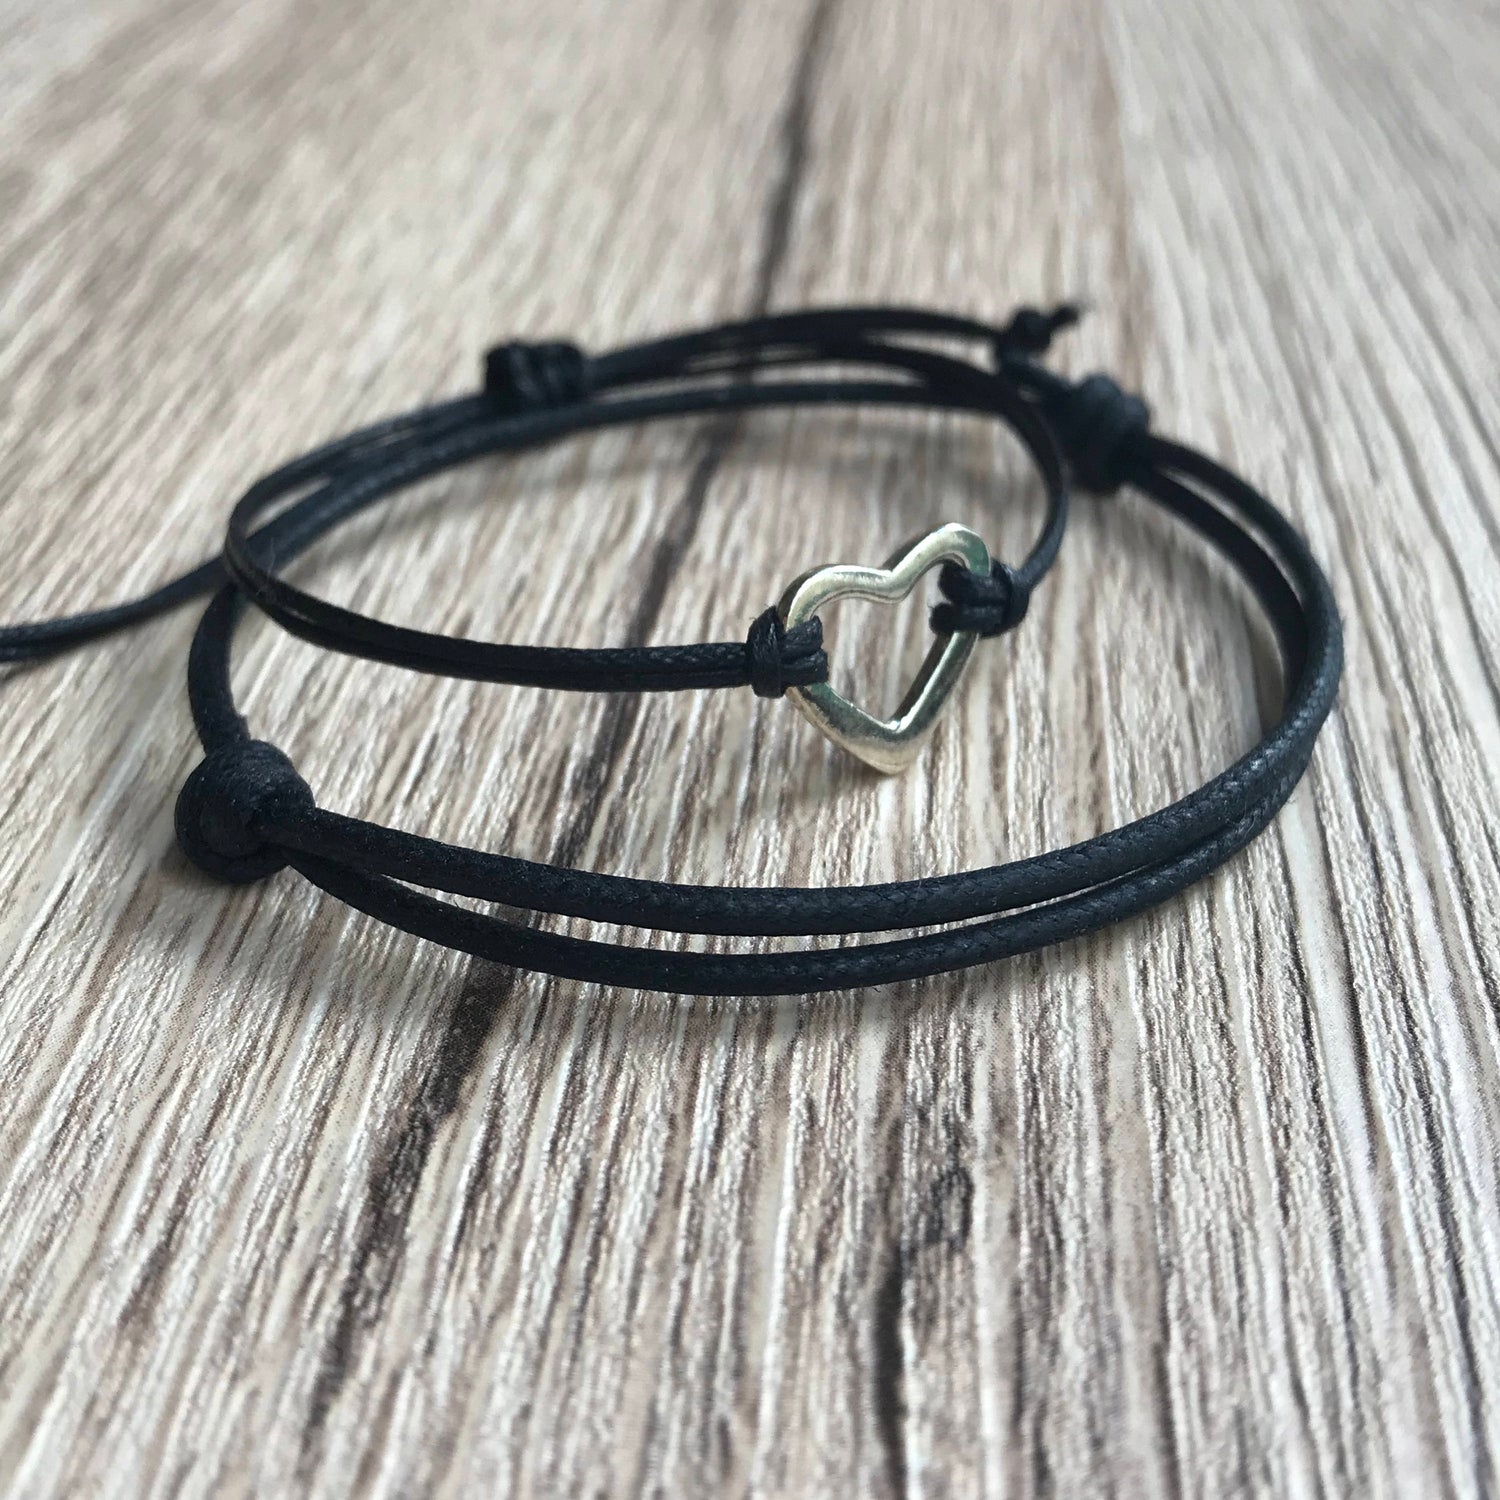 Black Magnet Attract Couple Bracelet Gifts Heart Shape - Couple Magnetic  Distance Bracelet - Valentine's Day Gift - Gift For Her - Gift For Him -  VivaGifts